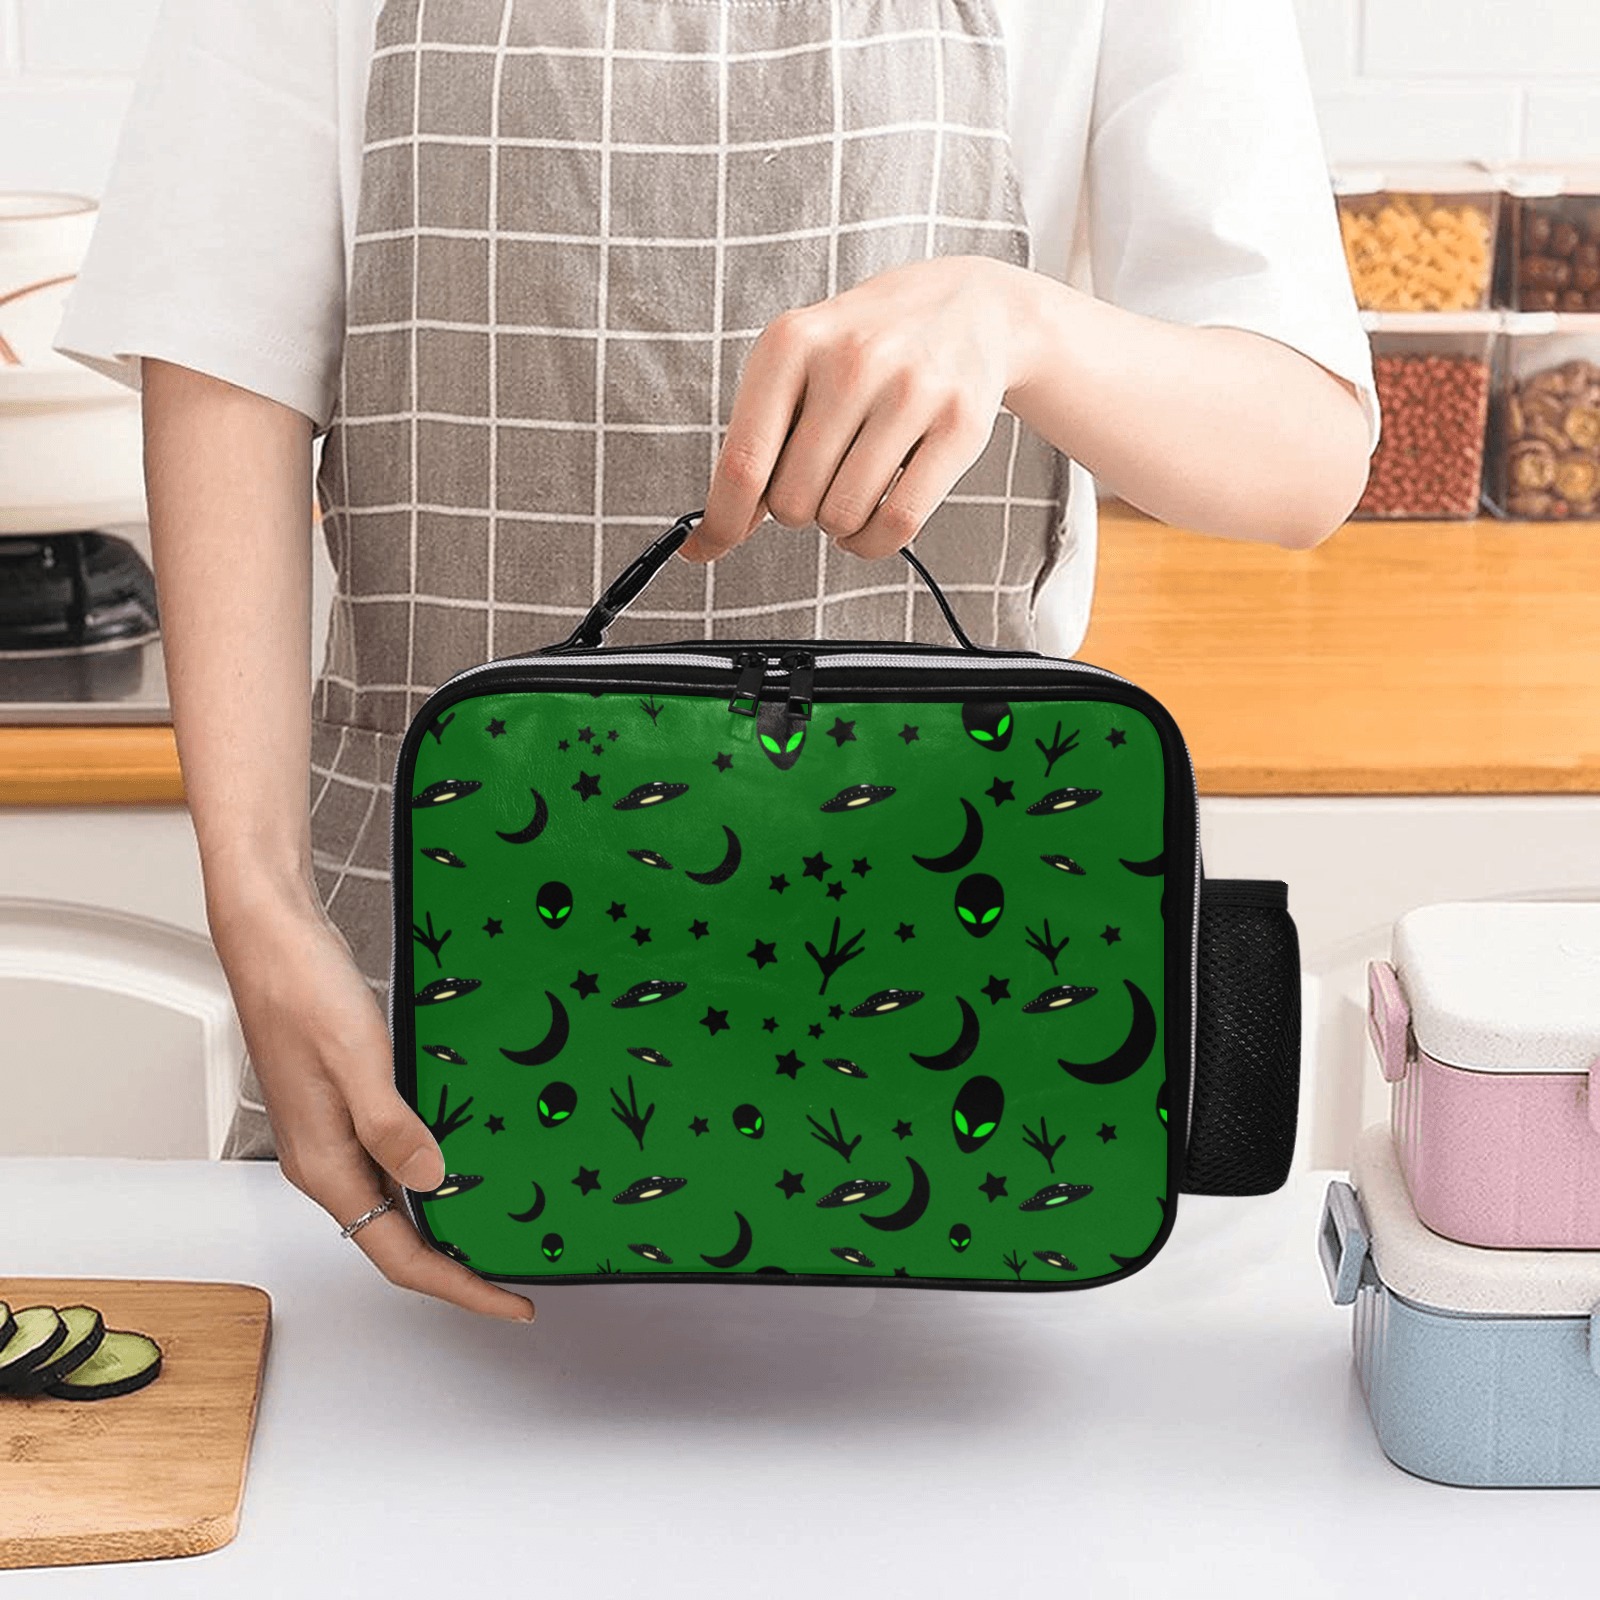 Aliens and Spaceships - Green PU Leather Lunch Bag (Model 1723)